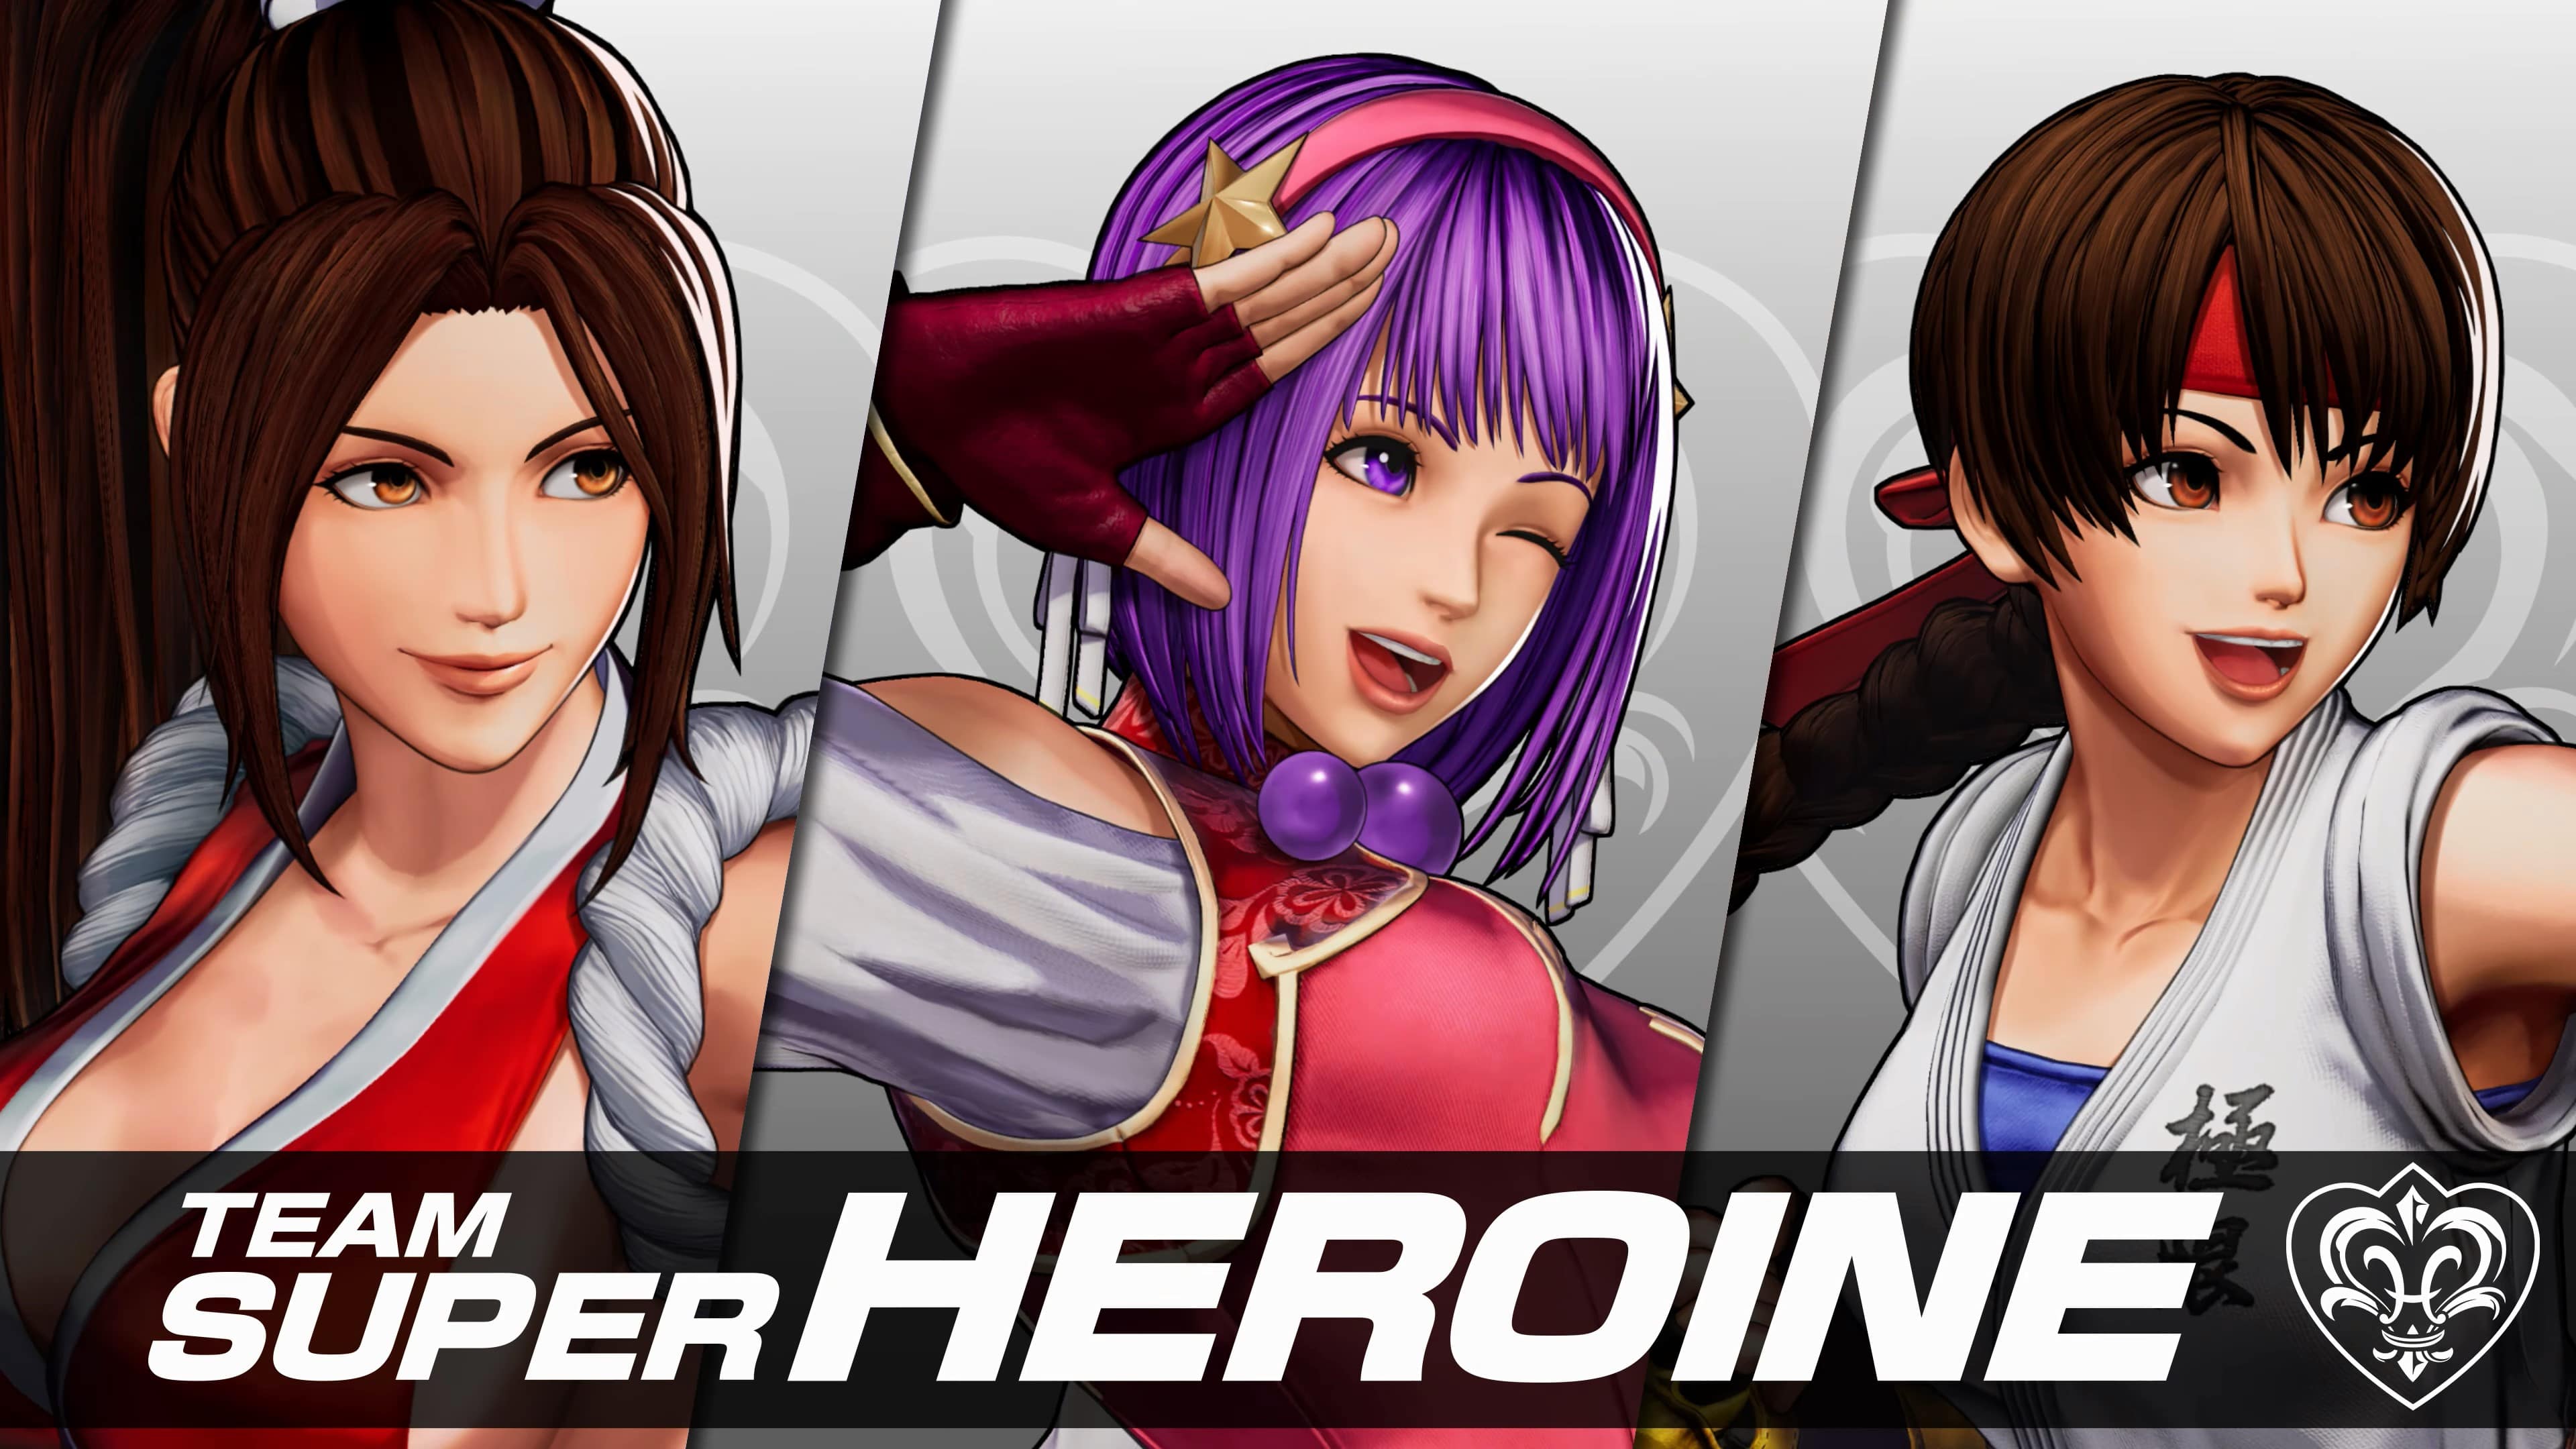 King of Fighters 15